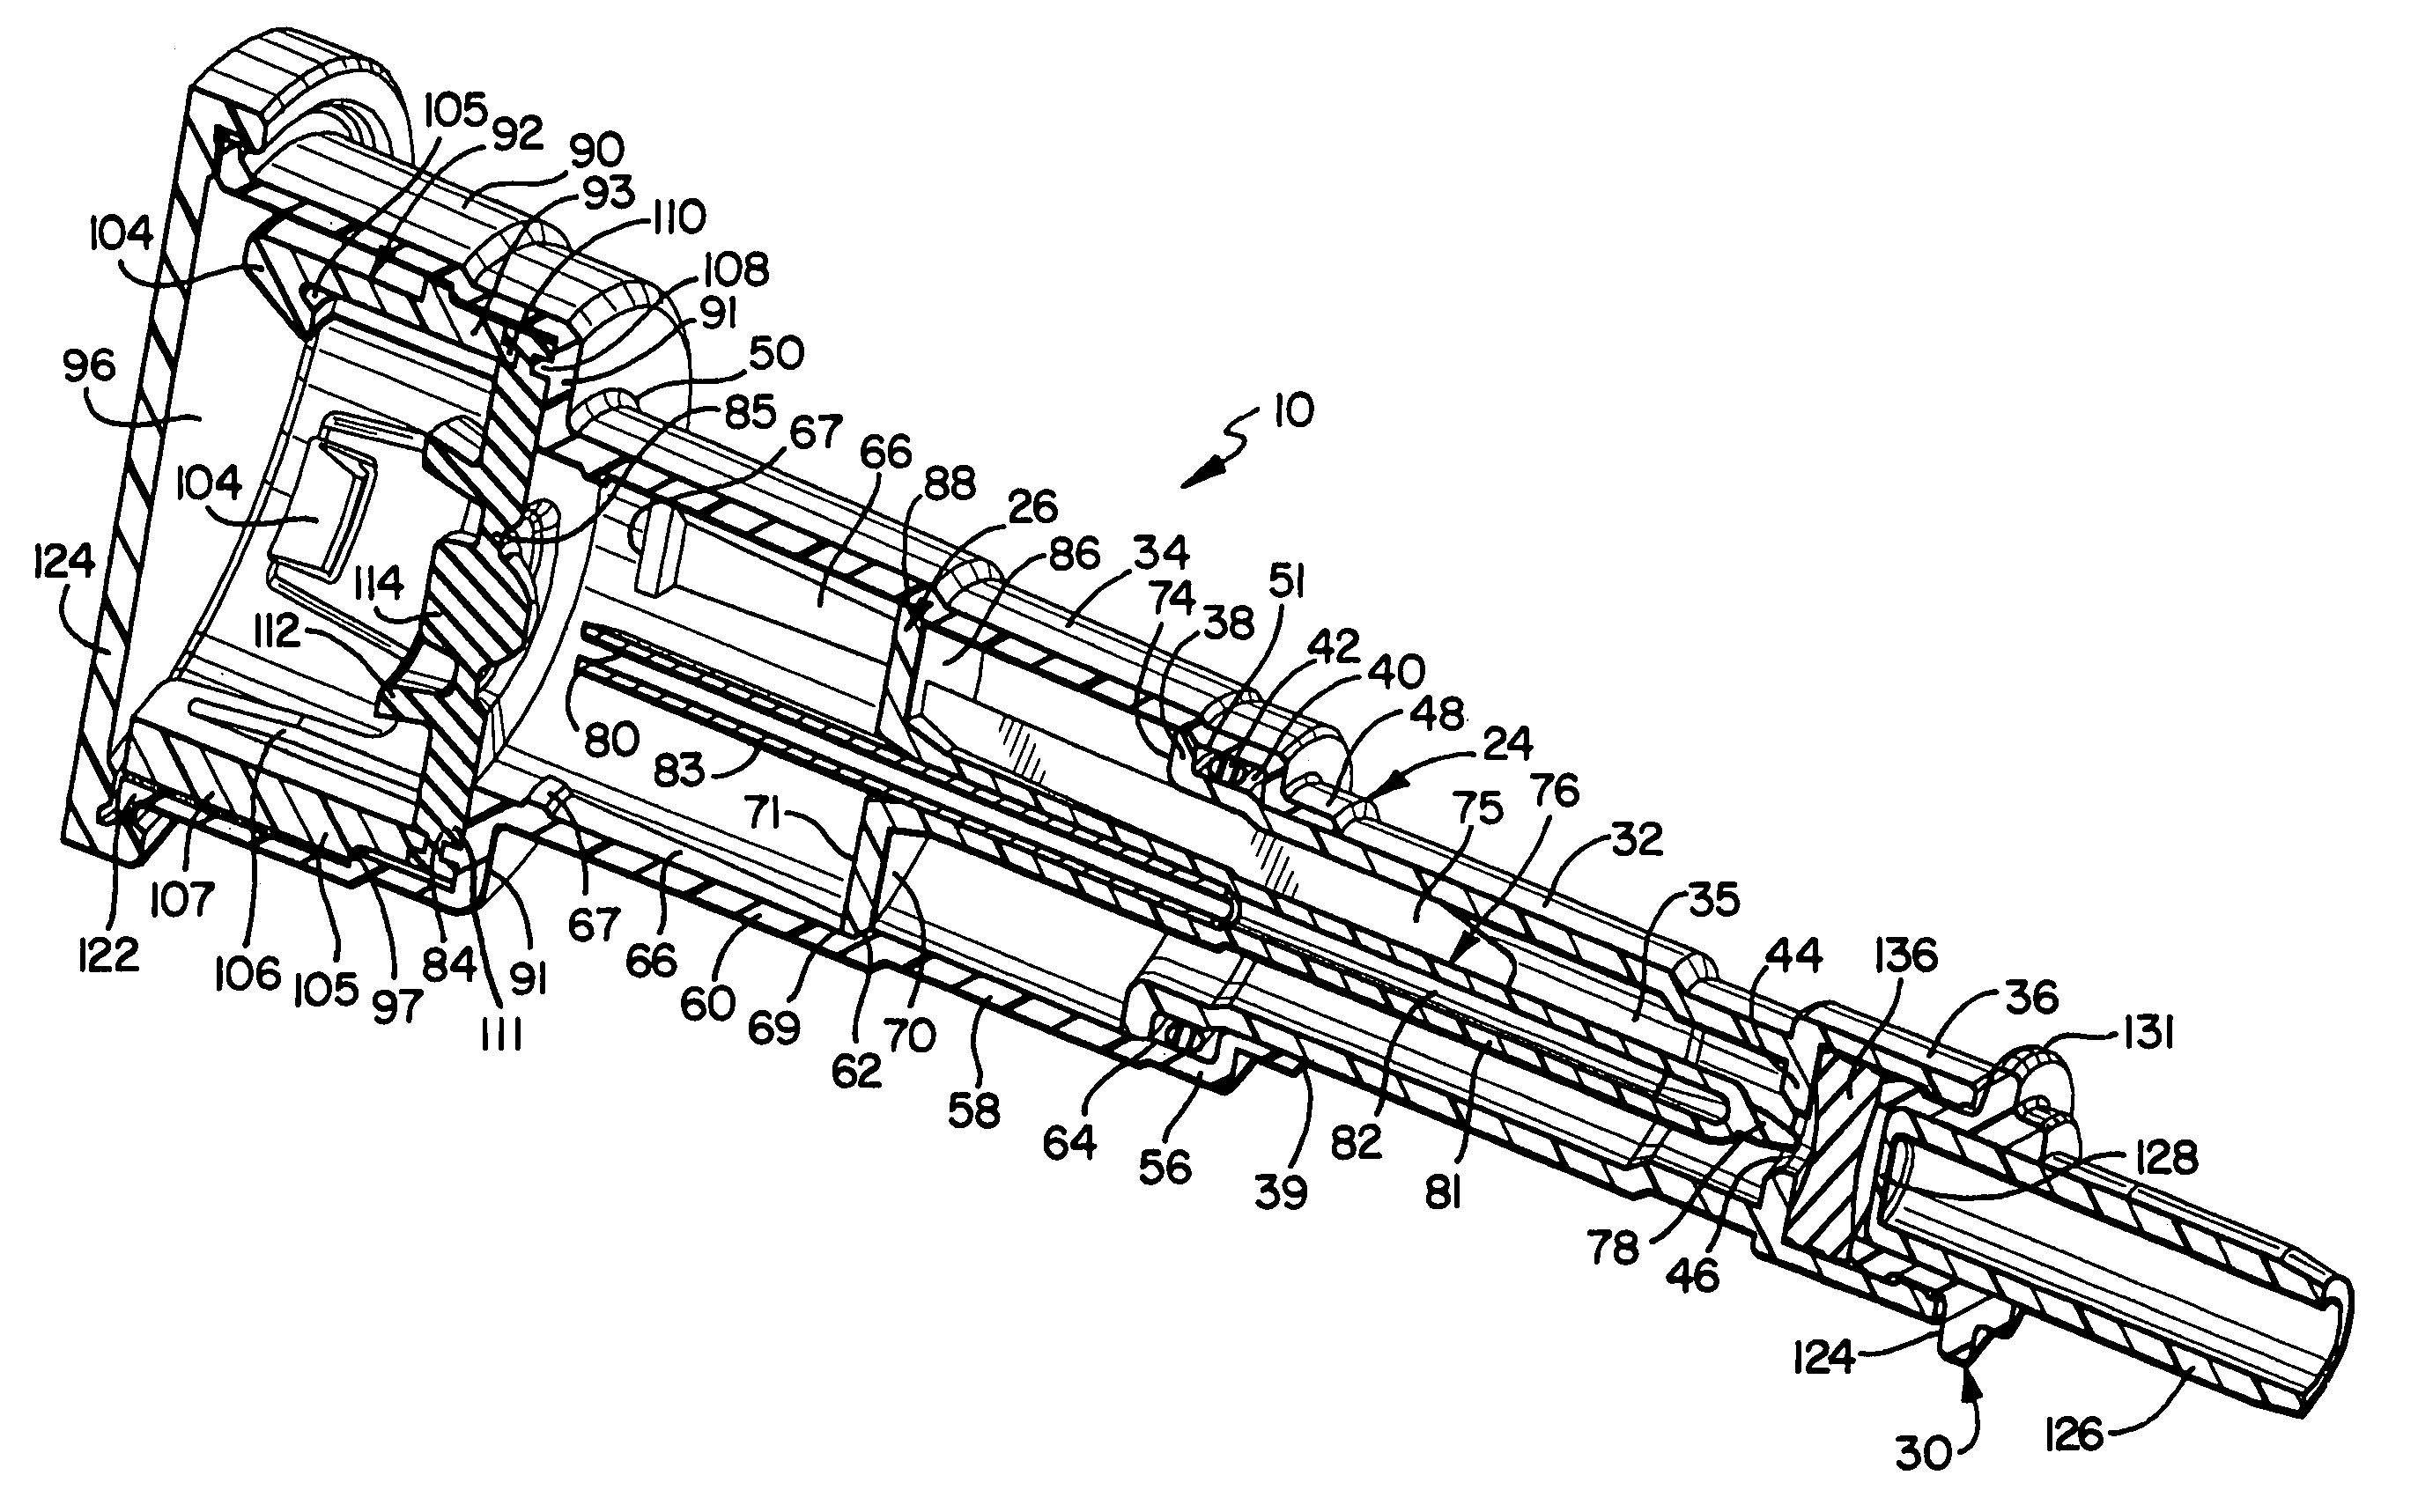 Sliding reconstitution device for a diluent container